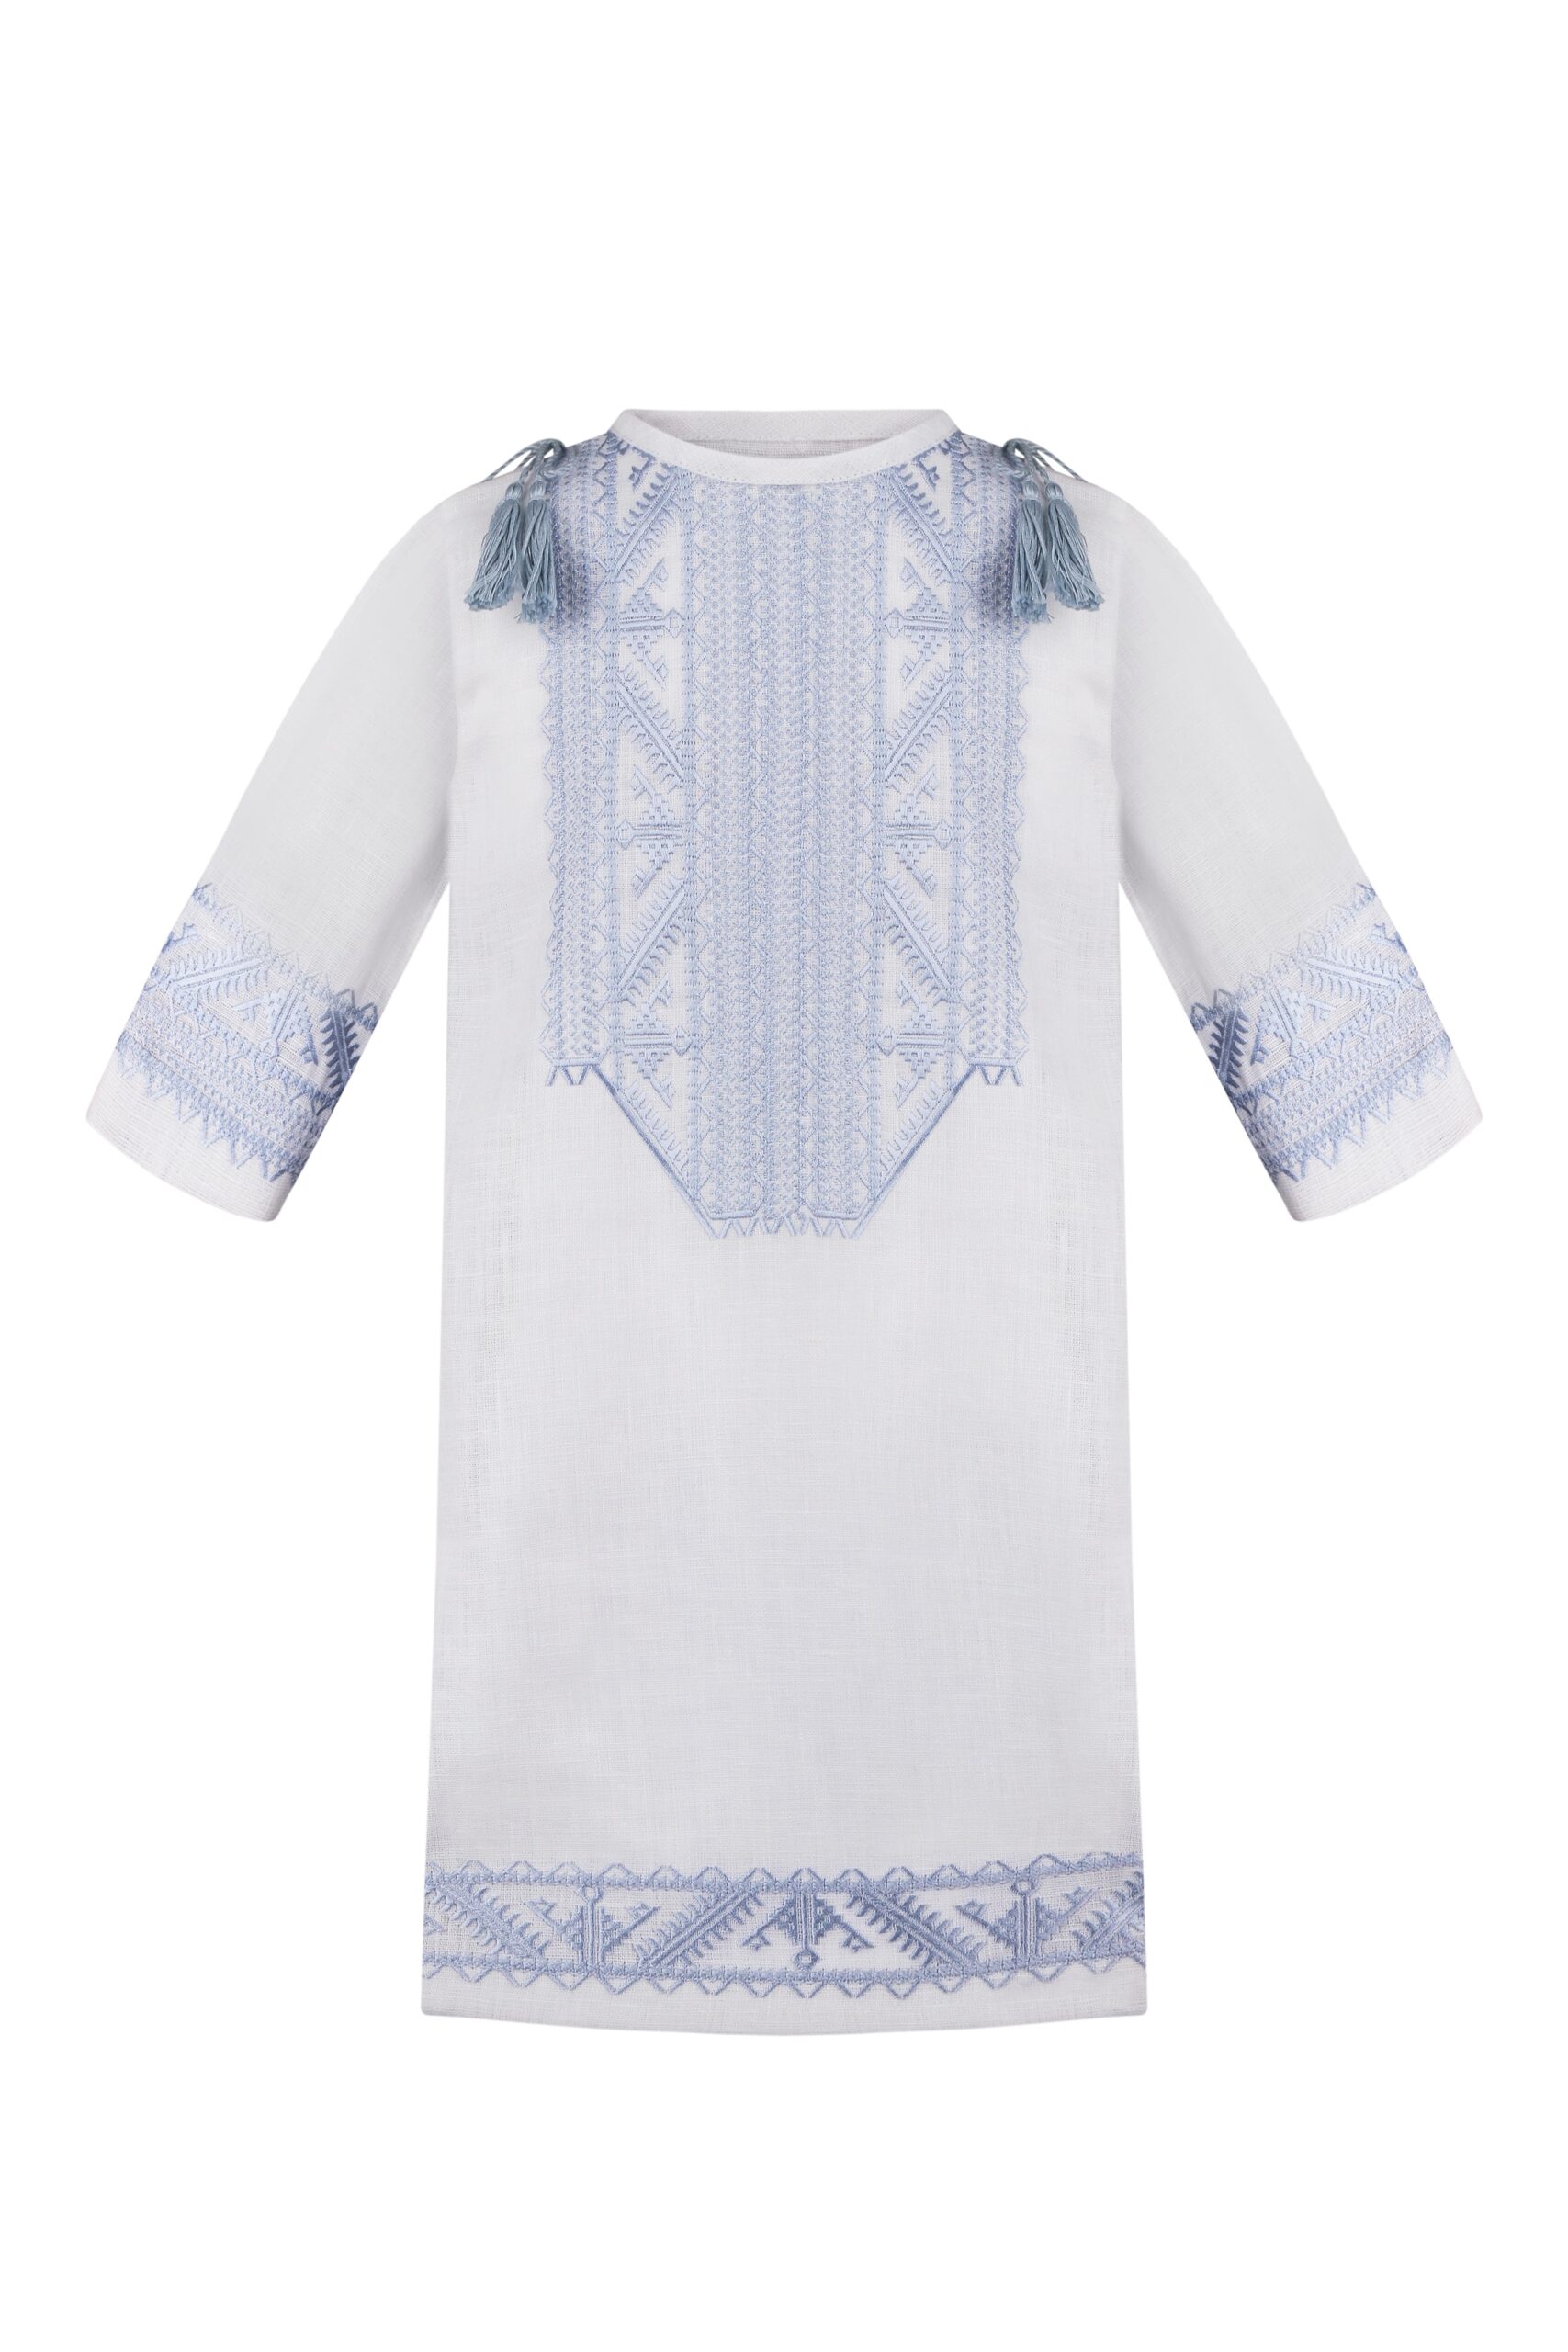 Shirt for baptism with blue embroidery